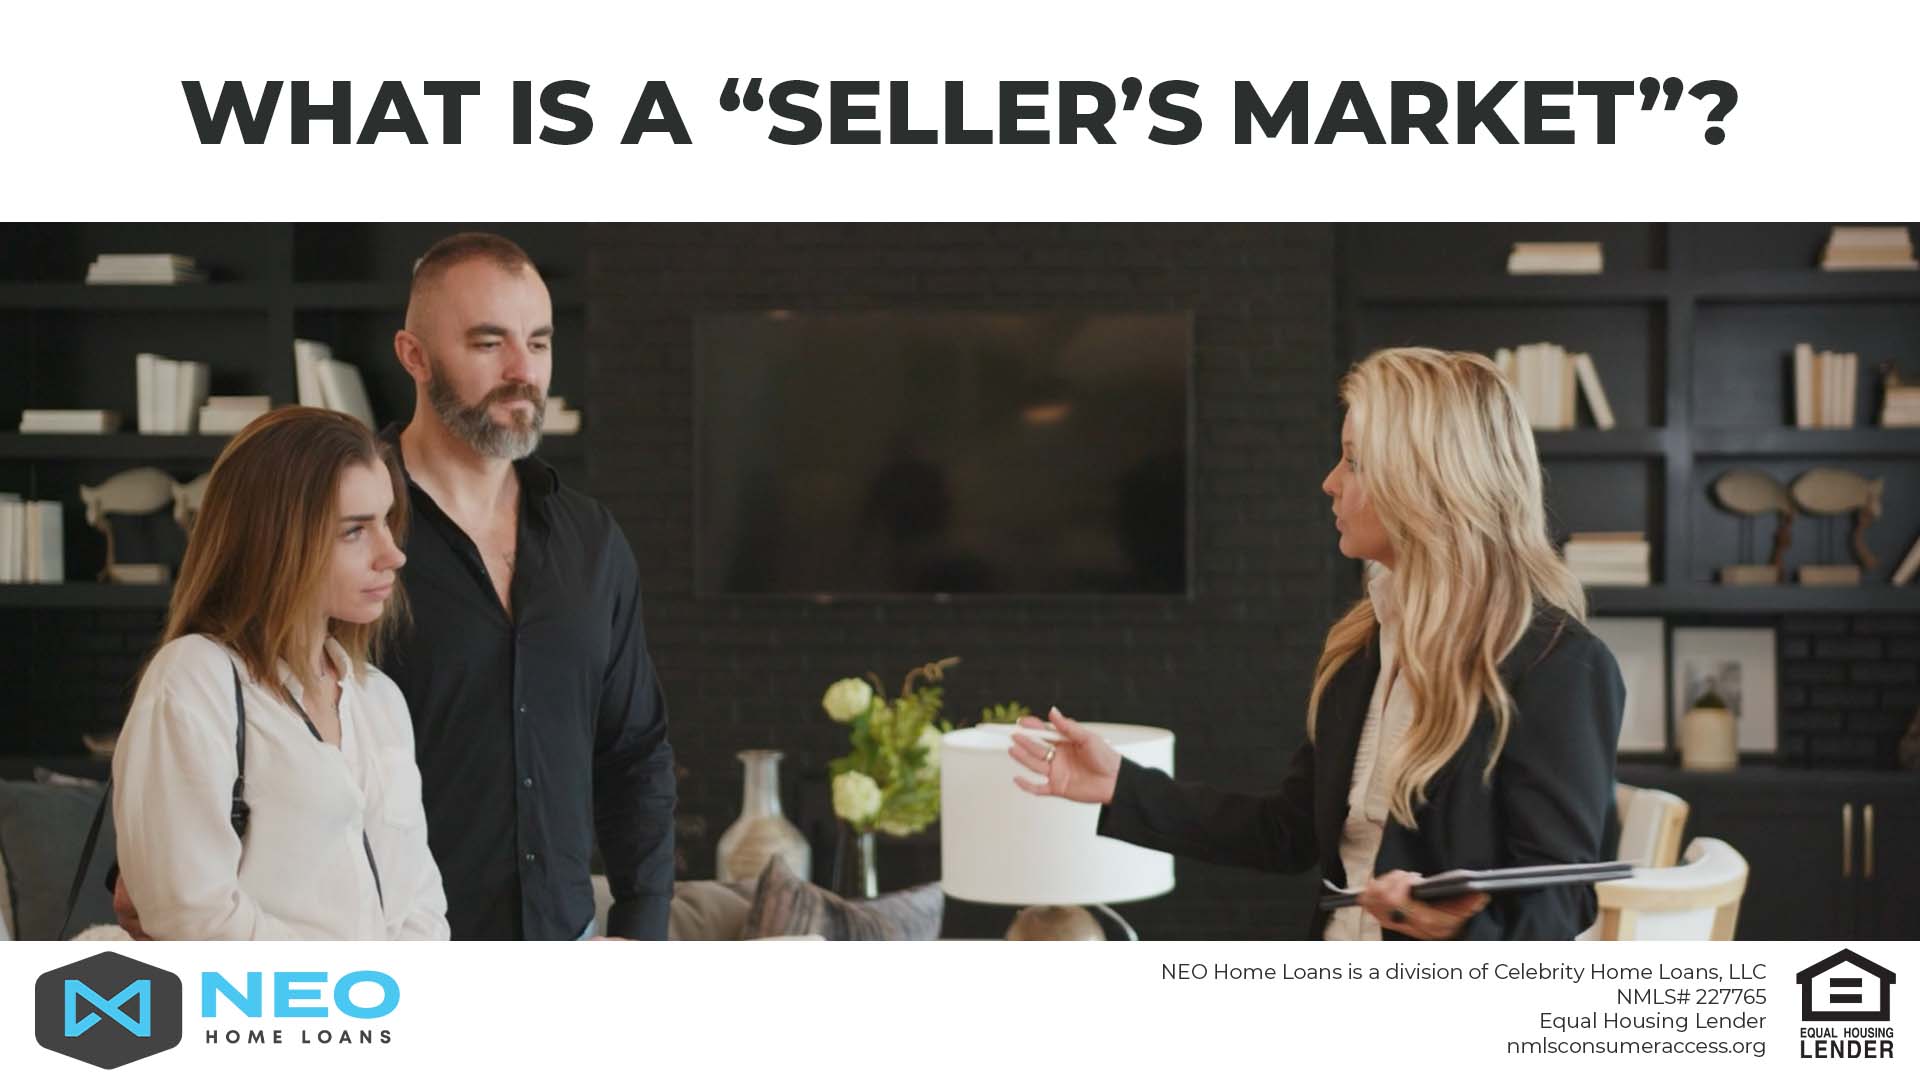 What Is A Seller’s Market?